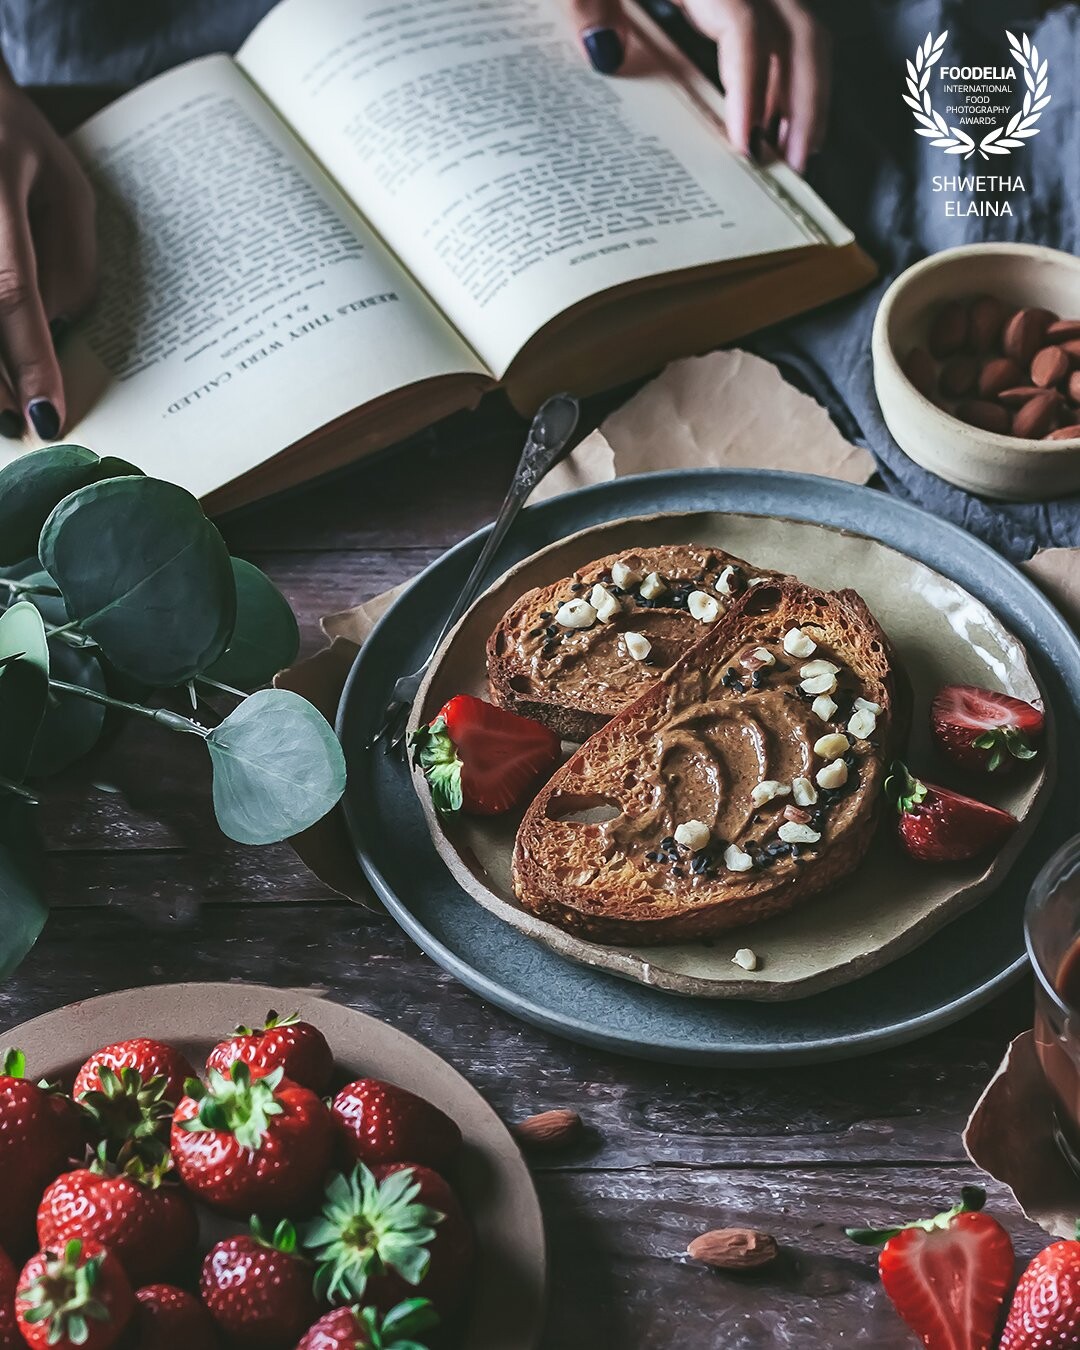 Almond butter on toasted GF bread with strawberries on the side. An attempt at creating a relaxed table scene and putting color theory in play.